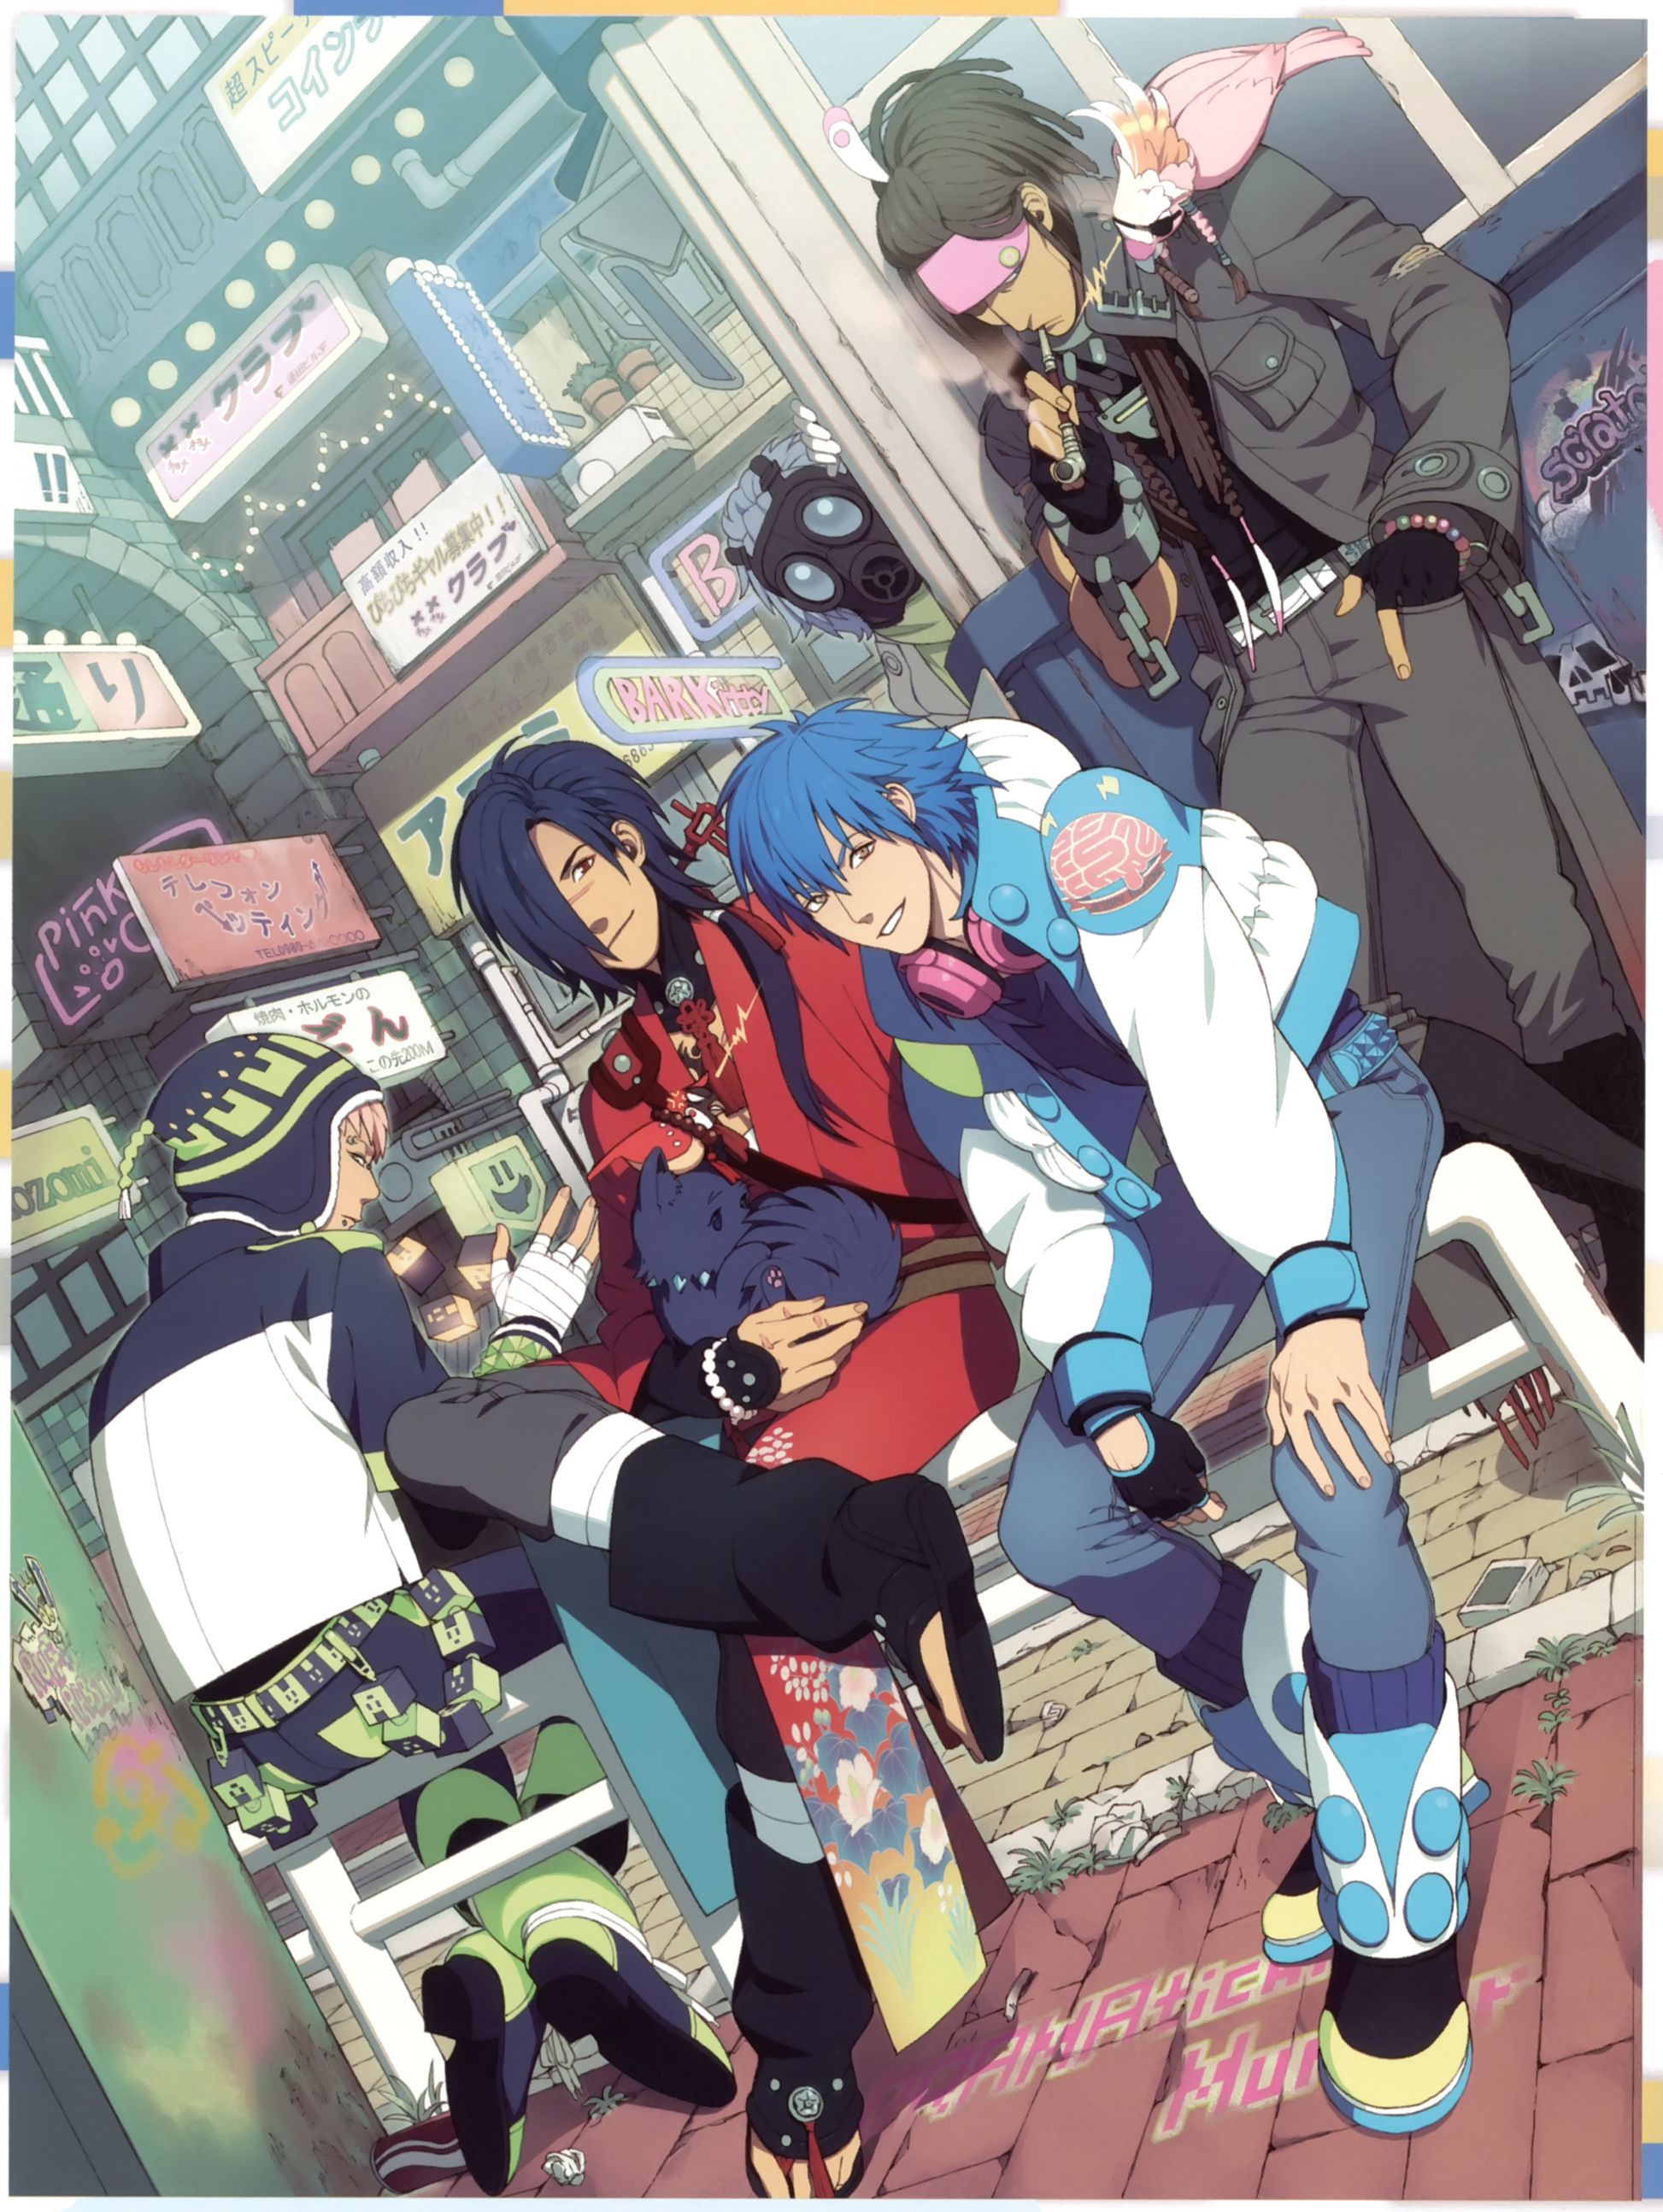 DRAMAtical Murder and Scan Gallery